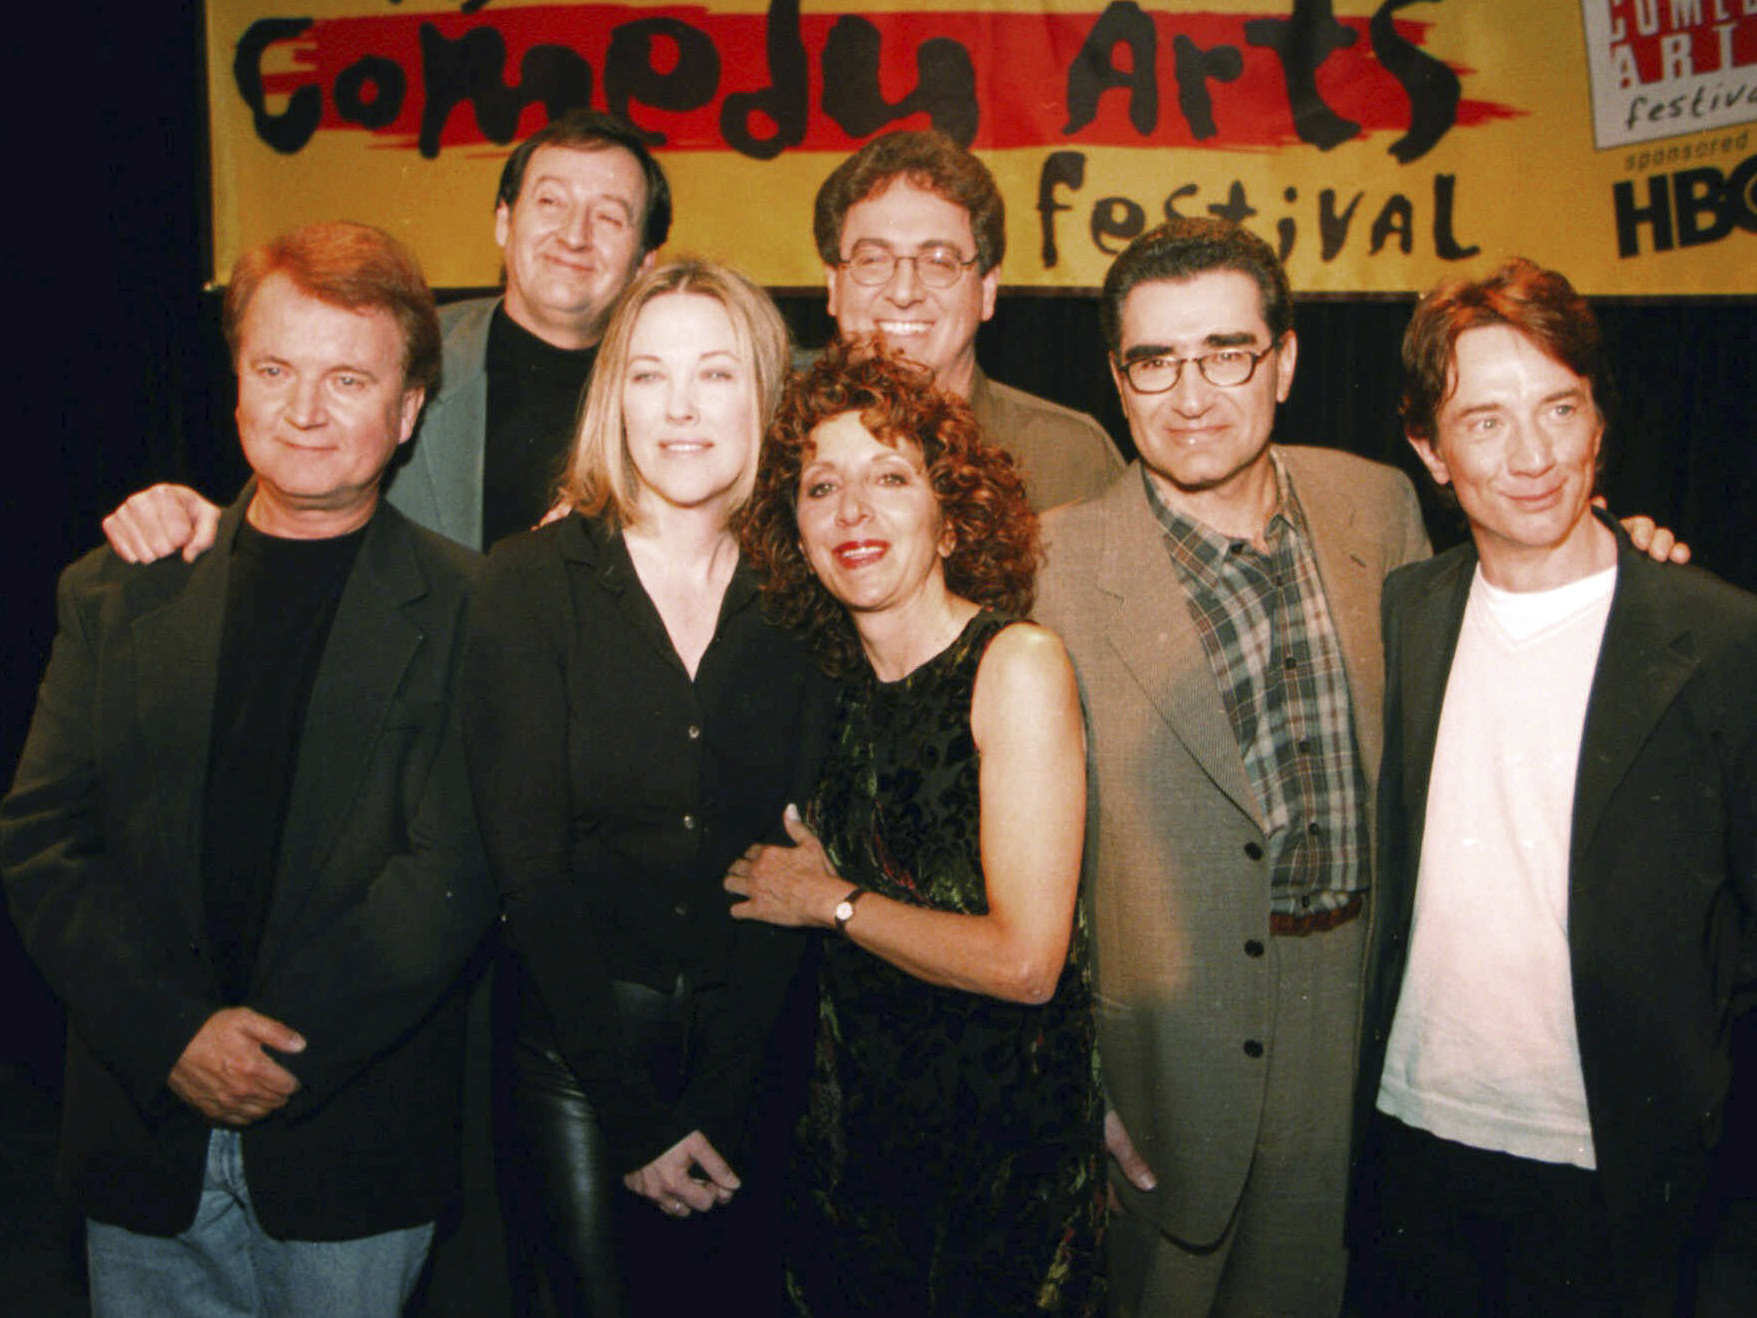 Former cast members of SCTV Dave Thomas (from left), Joe Flaherty, Catherine O'Hara, Andrea Martin, foreground, Harold Ramis, Eugene Levy and Martin Short, pose at the U.S. Comedy Arts Festival on March 6, 1999, in Aspen, Colo. Flaherty, a founding member of the Canadian sketch series "SCTV," died Monday at age 82.